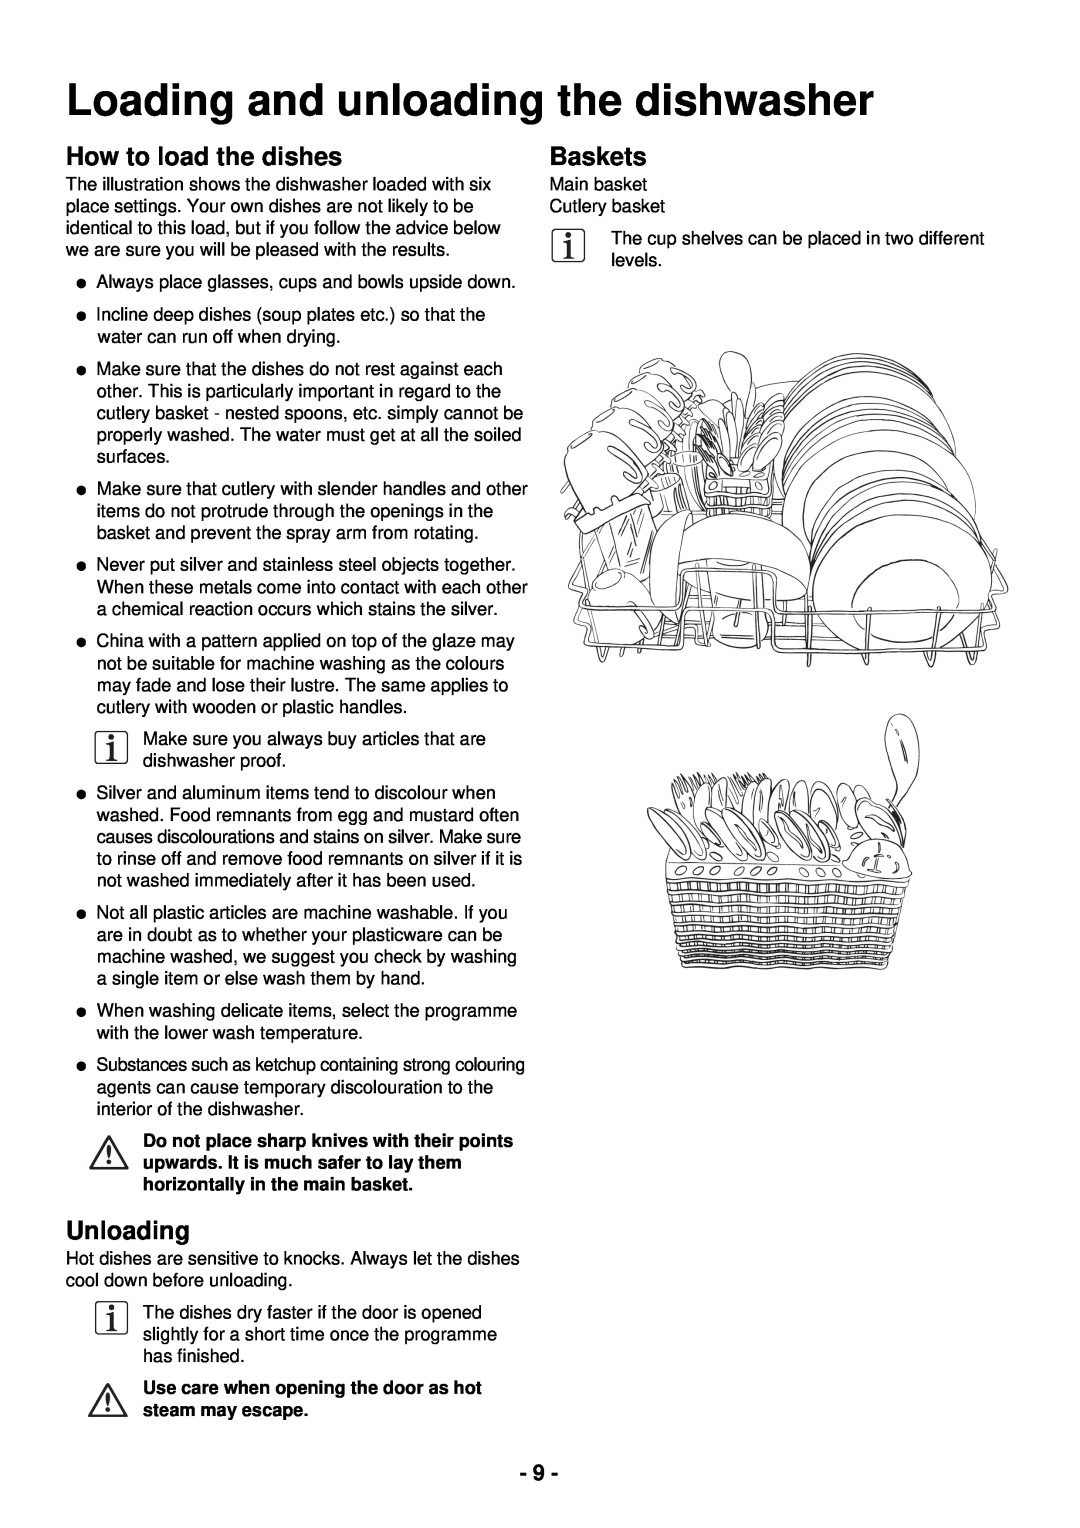 Zanussi ZSF 2420 manual Loading and unloading the dishwasher, How to load the dishes, Unloading, Baskets 